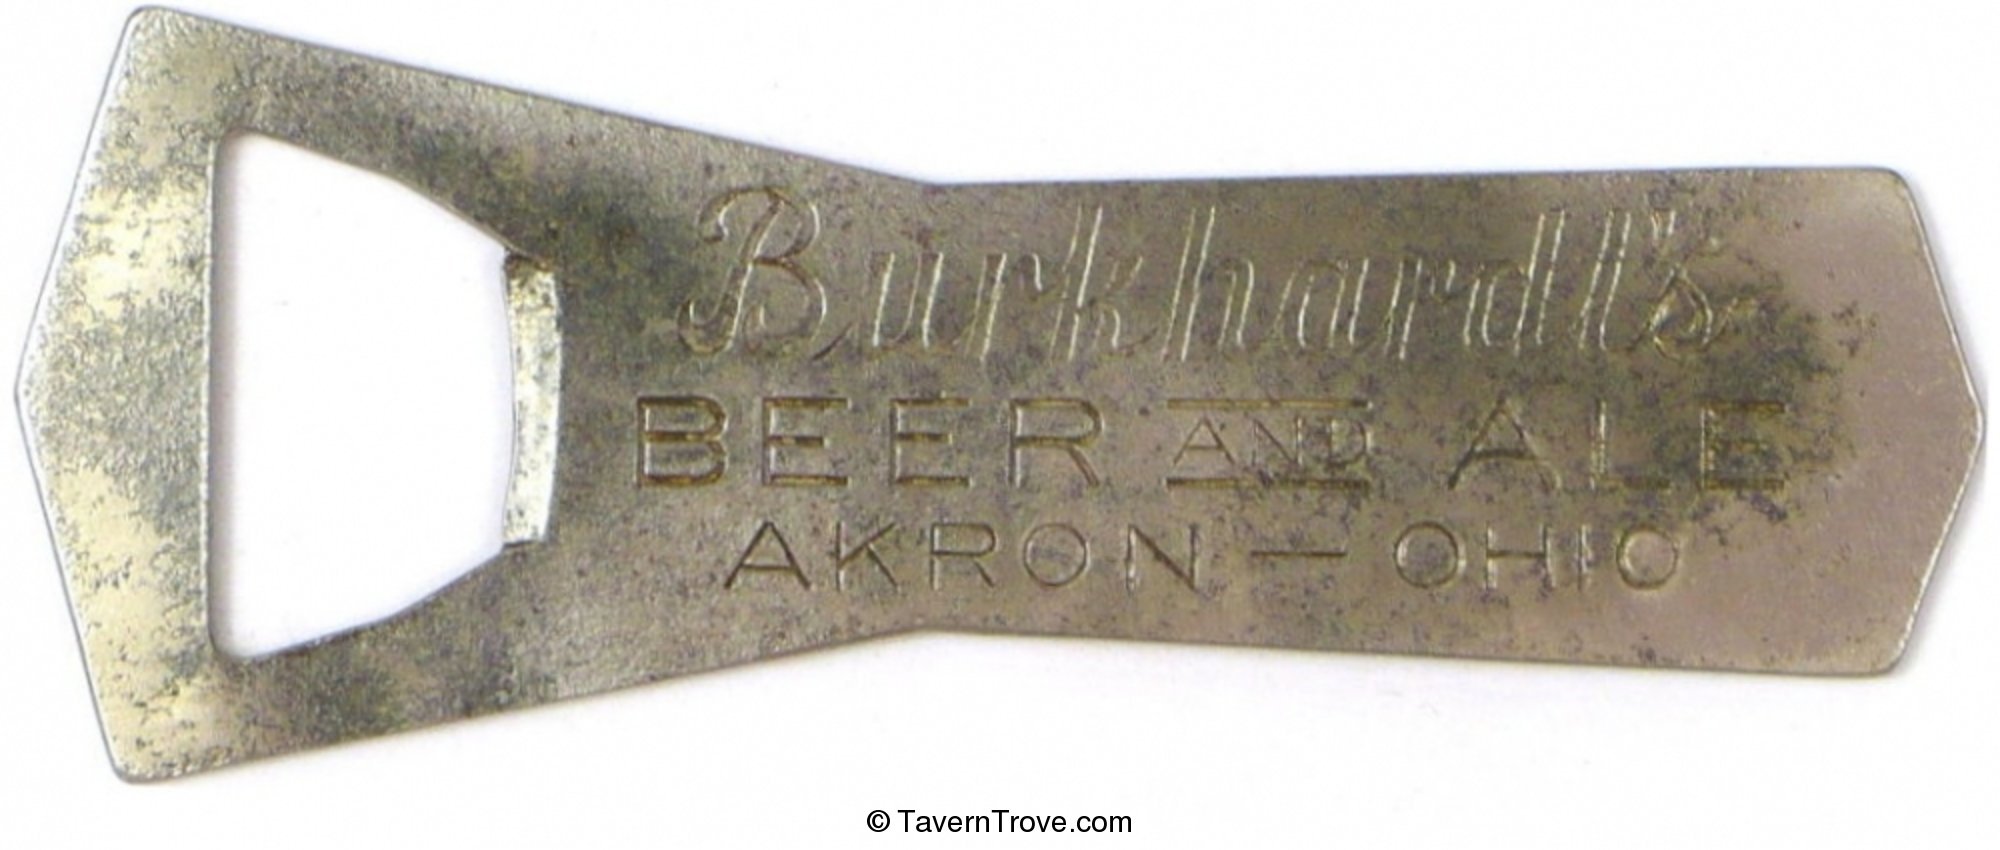 Burkhardt's Beer and Ale